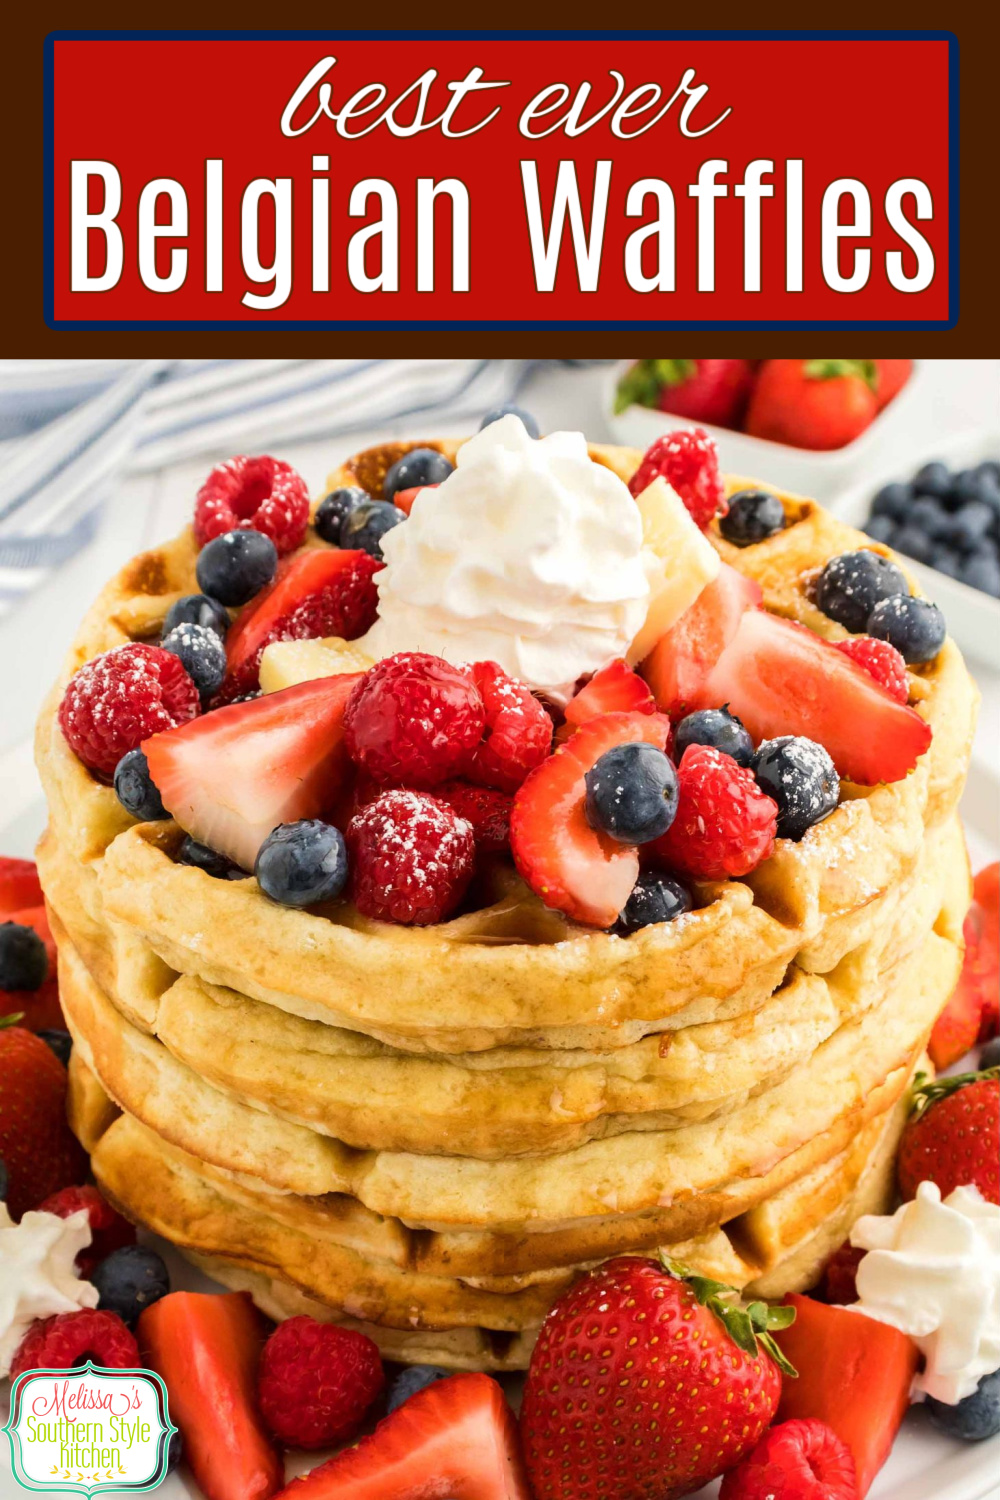 This Belgian Waffles Recipe is a stellar option for weekend breakfasts, holiday brunch or dessert topped with whipped cream and berries #waffles #belgianwaffles #wafflerecipes #holidaybrunch #breakfast #brunchrecipes via @melissasssk